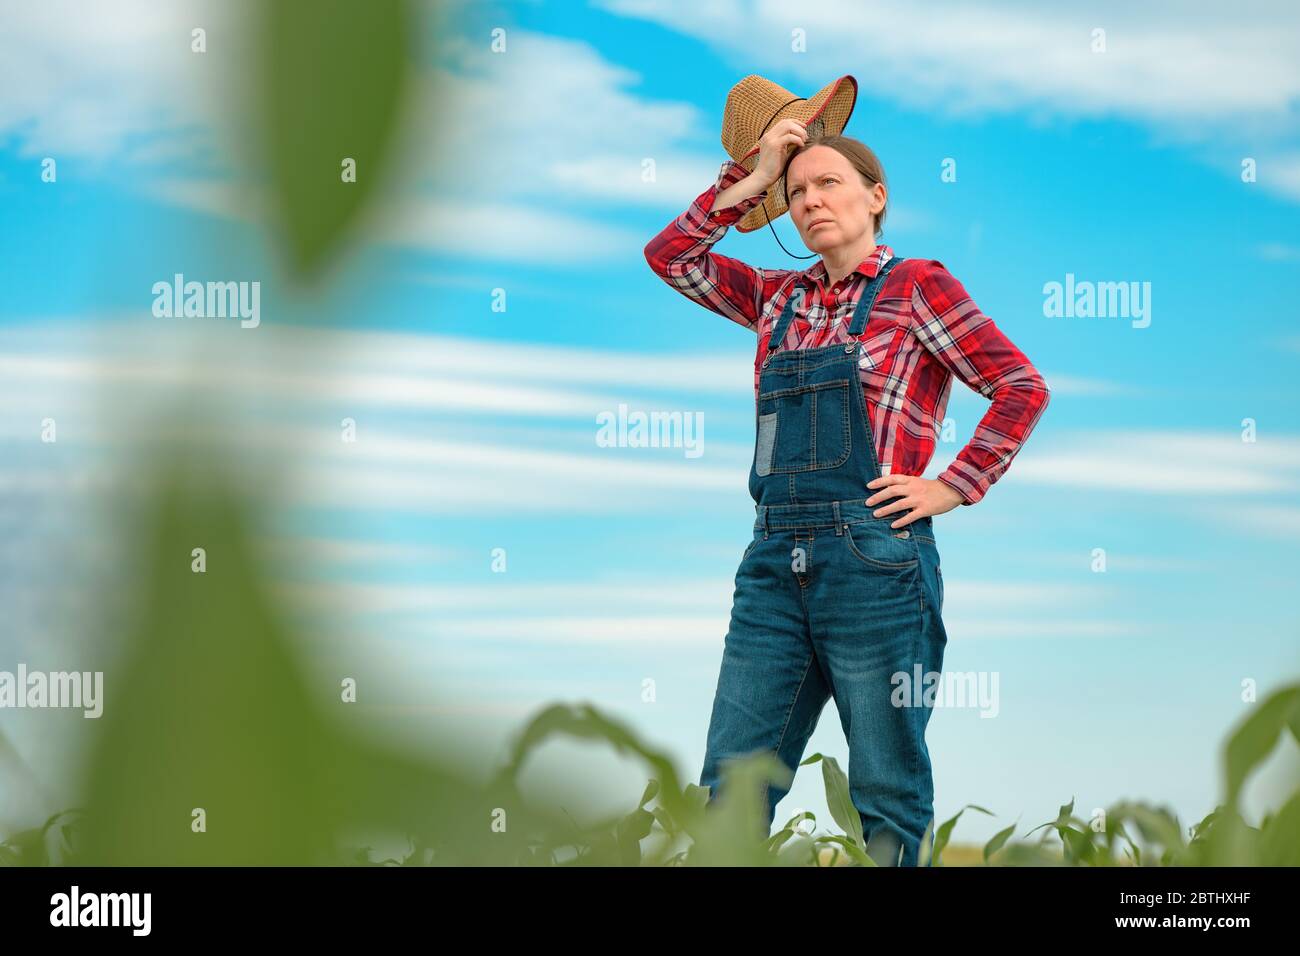 Female agronomist standing in corn field and looking over young green maize crops Stock Photo